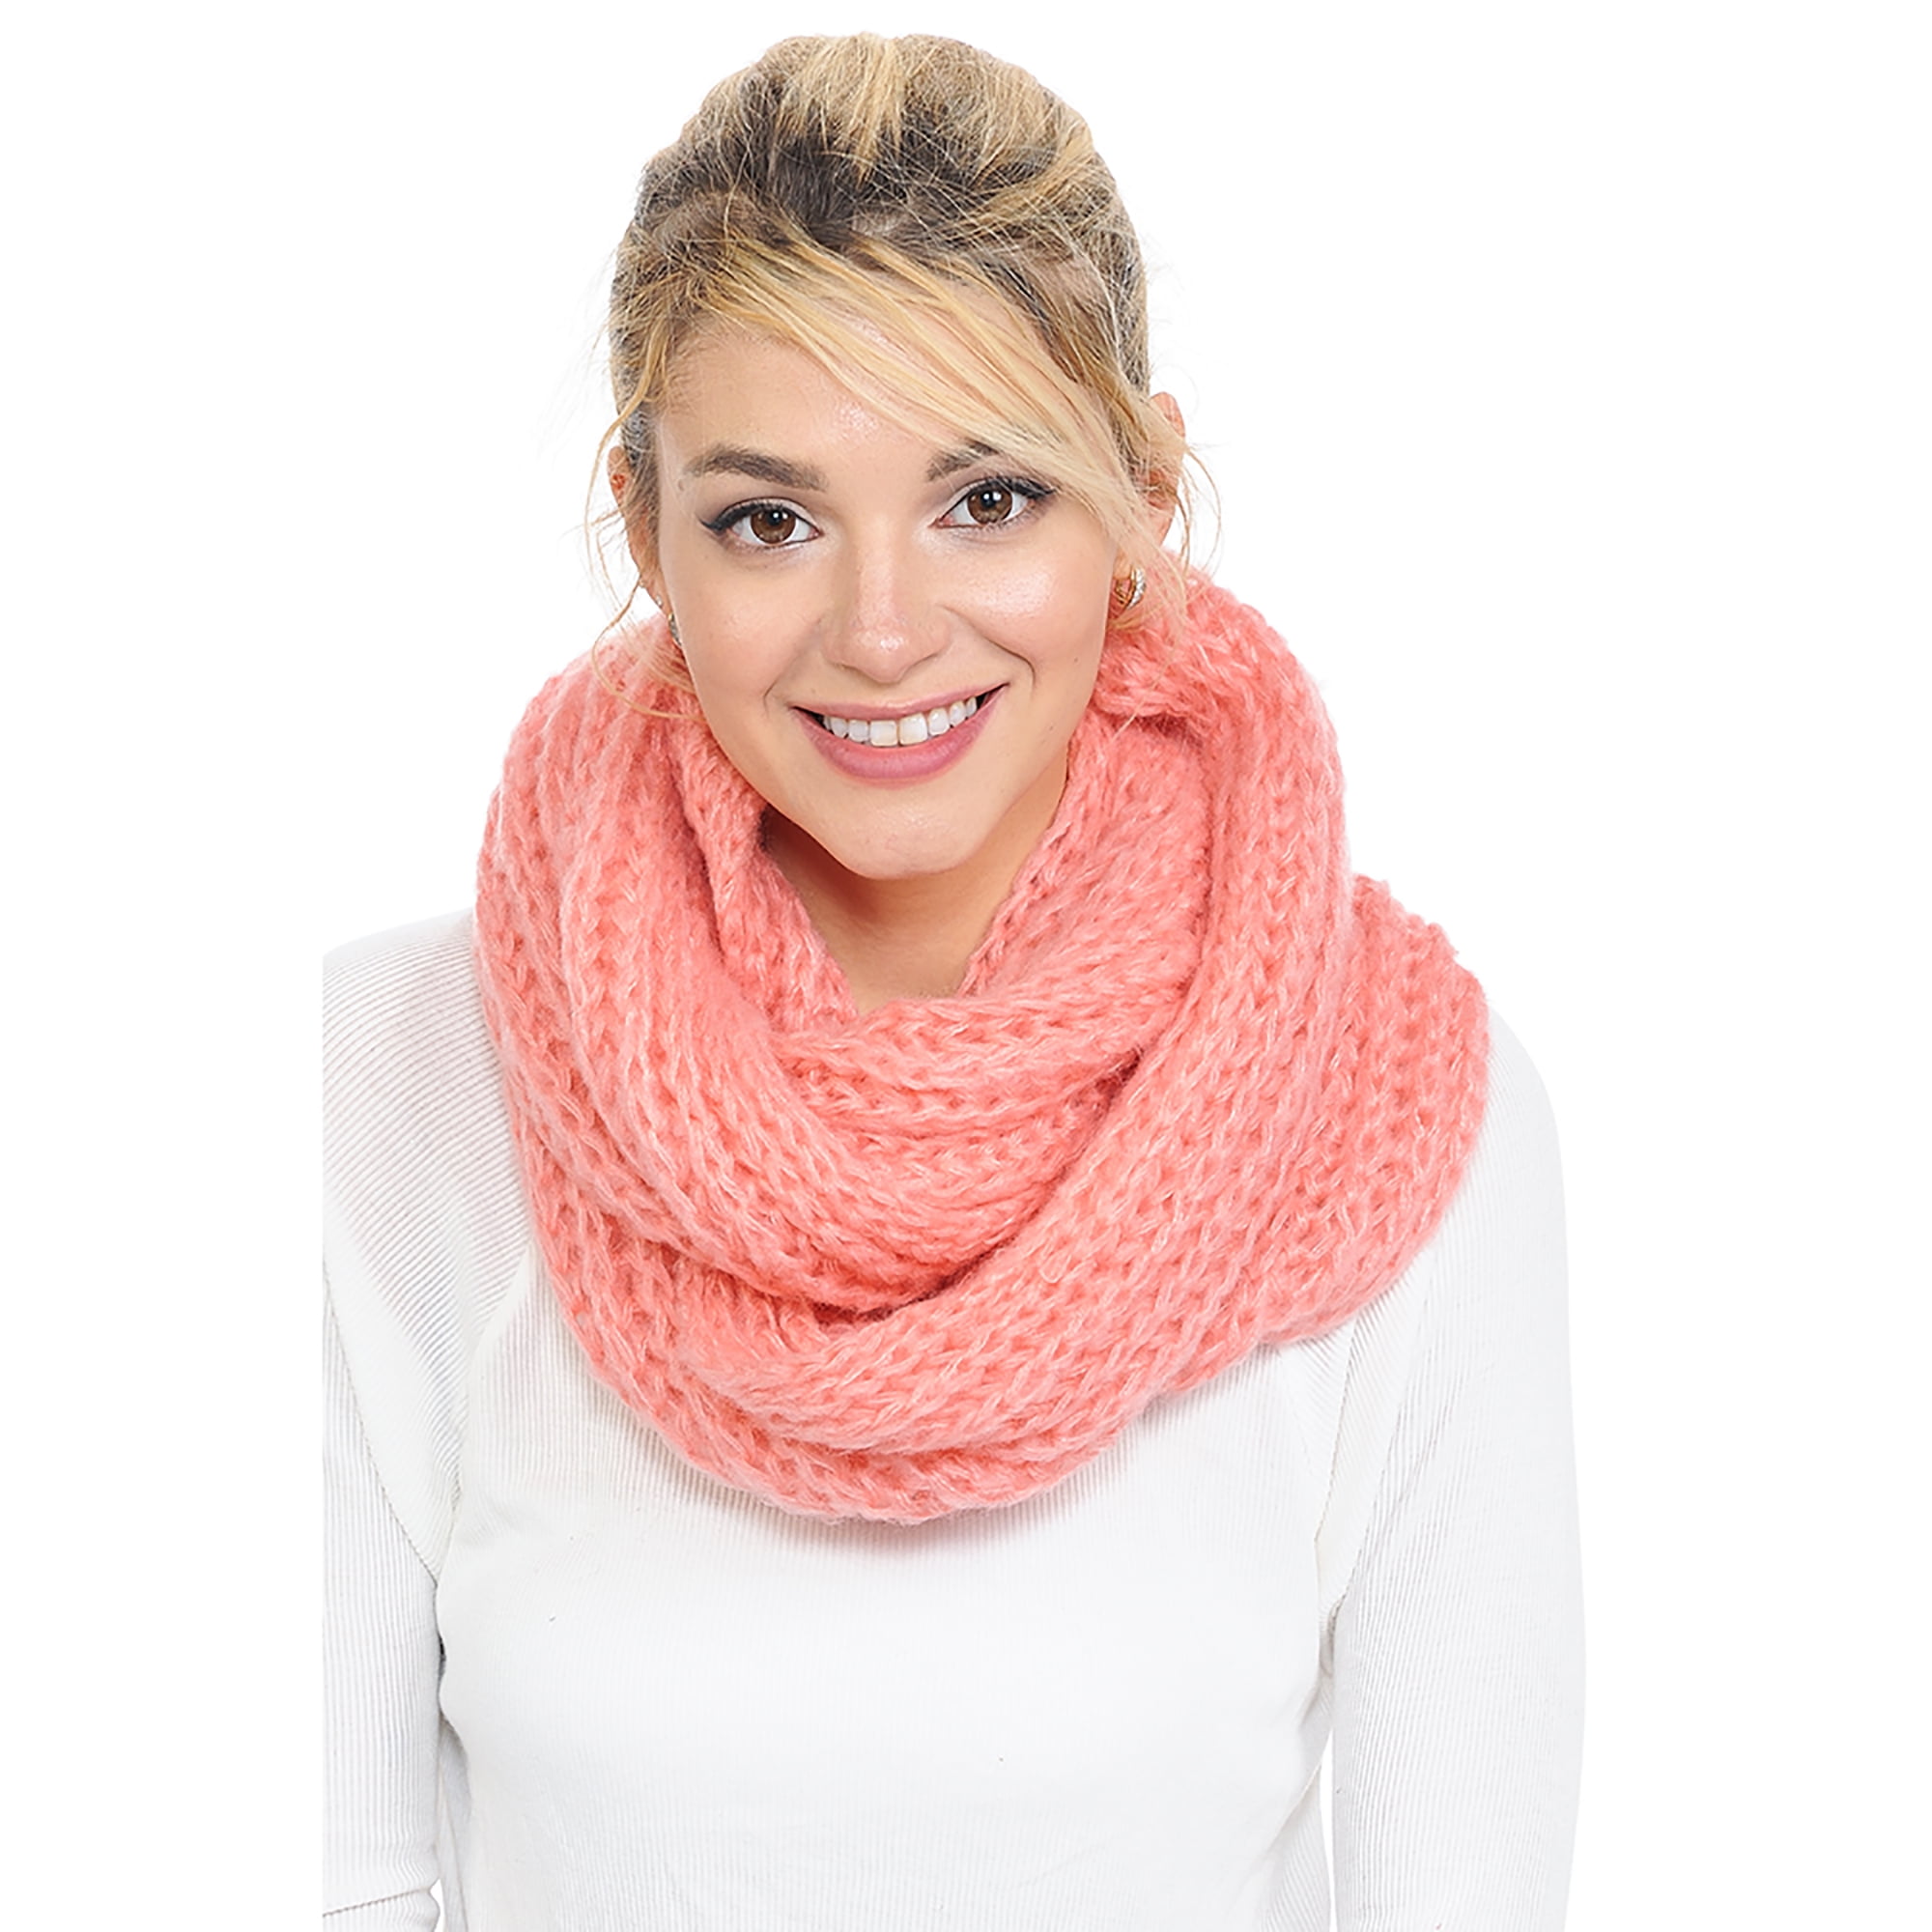 Pink infinity scarf Valentine's gift fashion accessory gift for her pink knit scarf with sparkles soft knit circle scarf